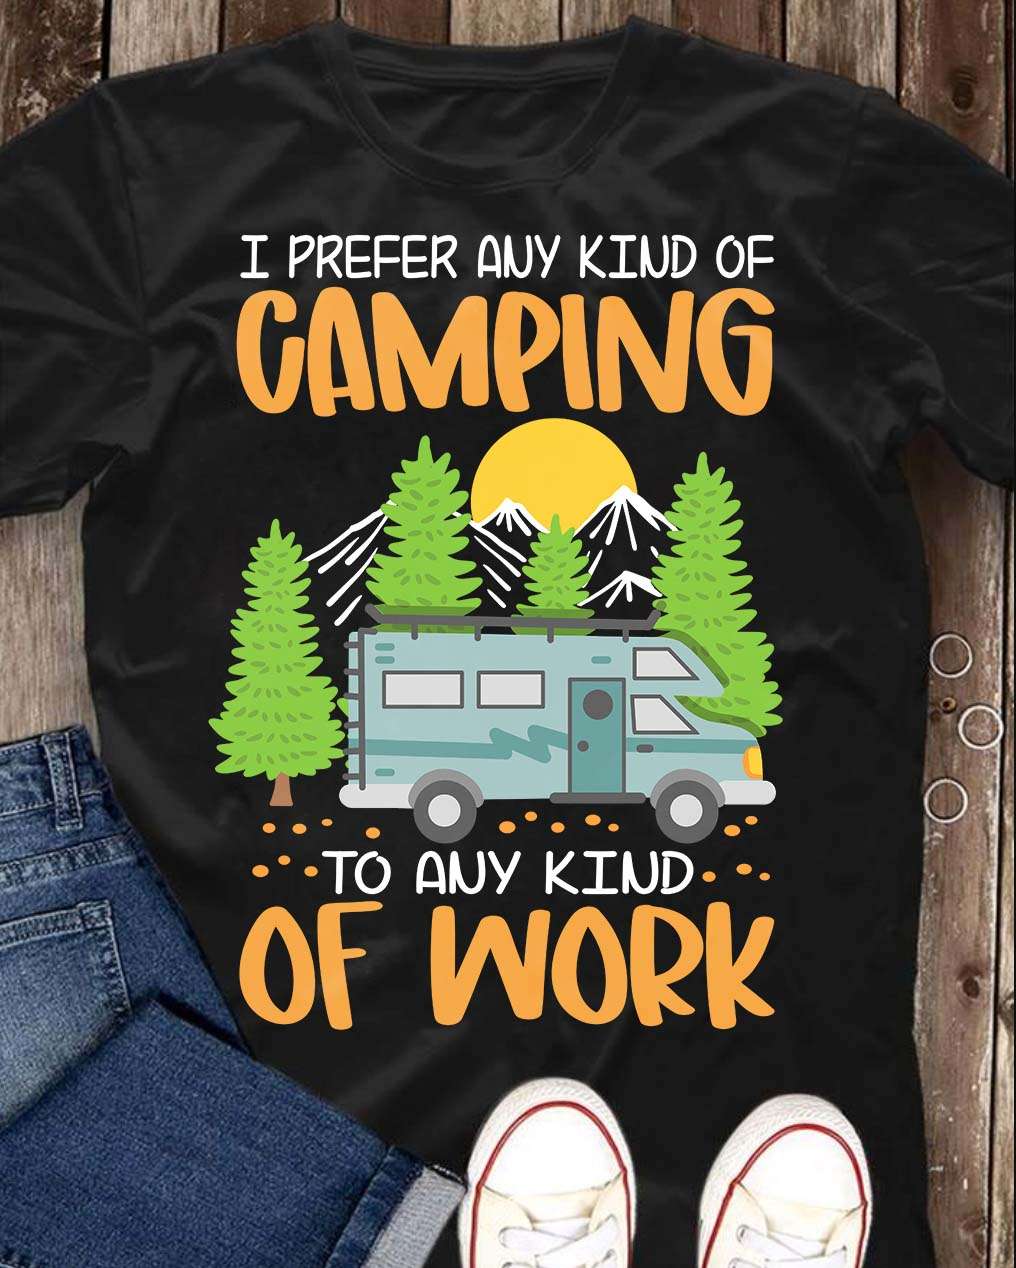 I prefer any kind of camping to any kind of work - Camping on the mountain, love camping than working